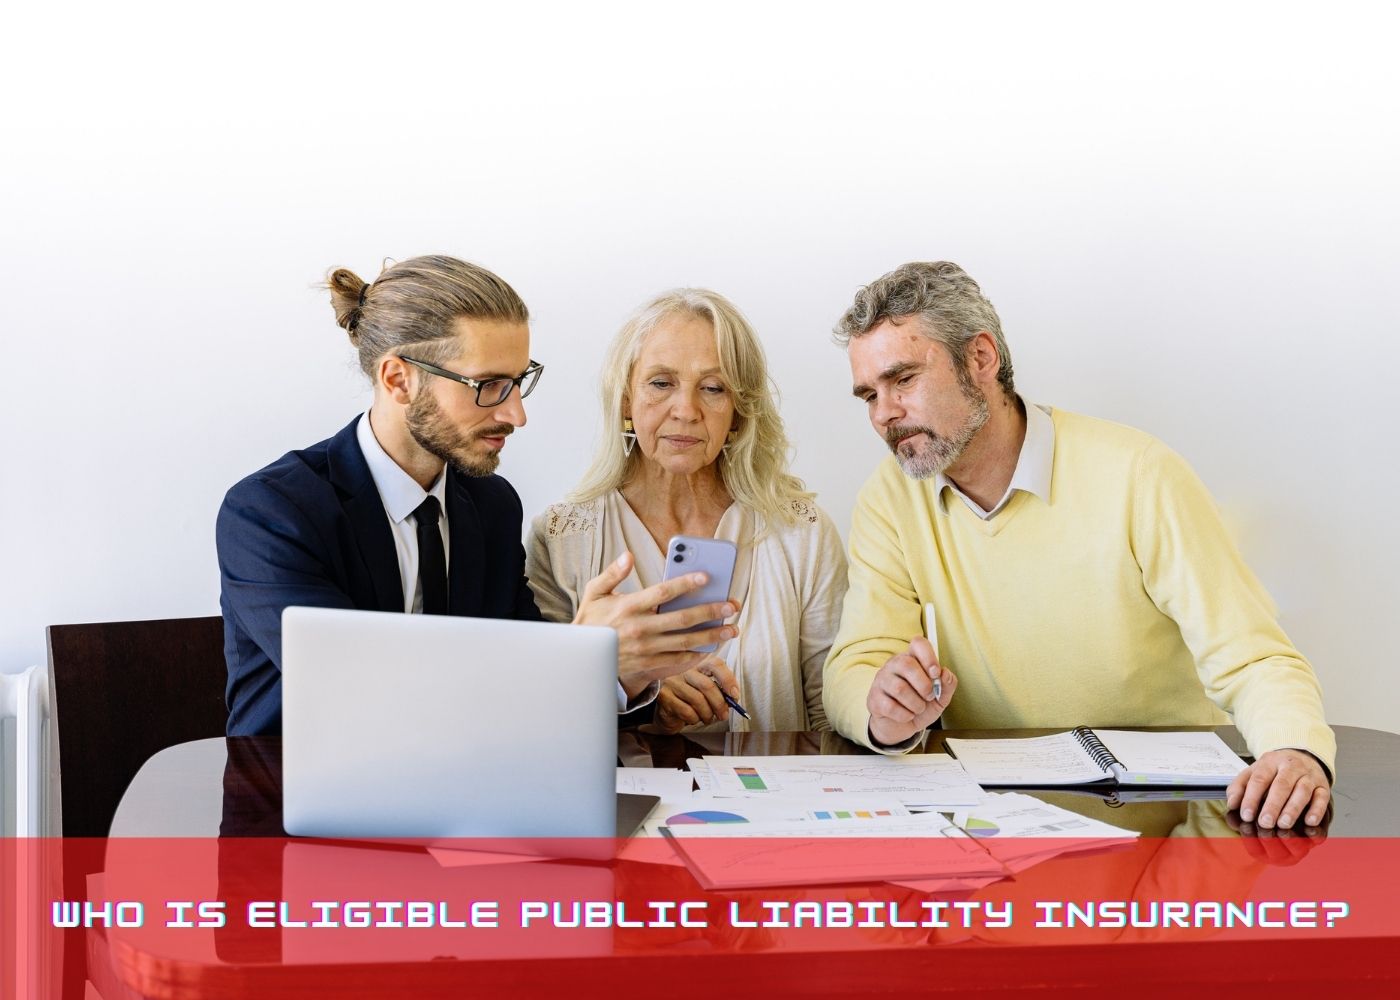 Who is Eligible Public Liability Insurance?